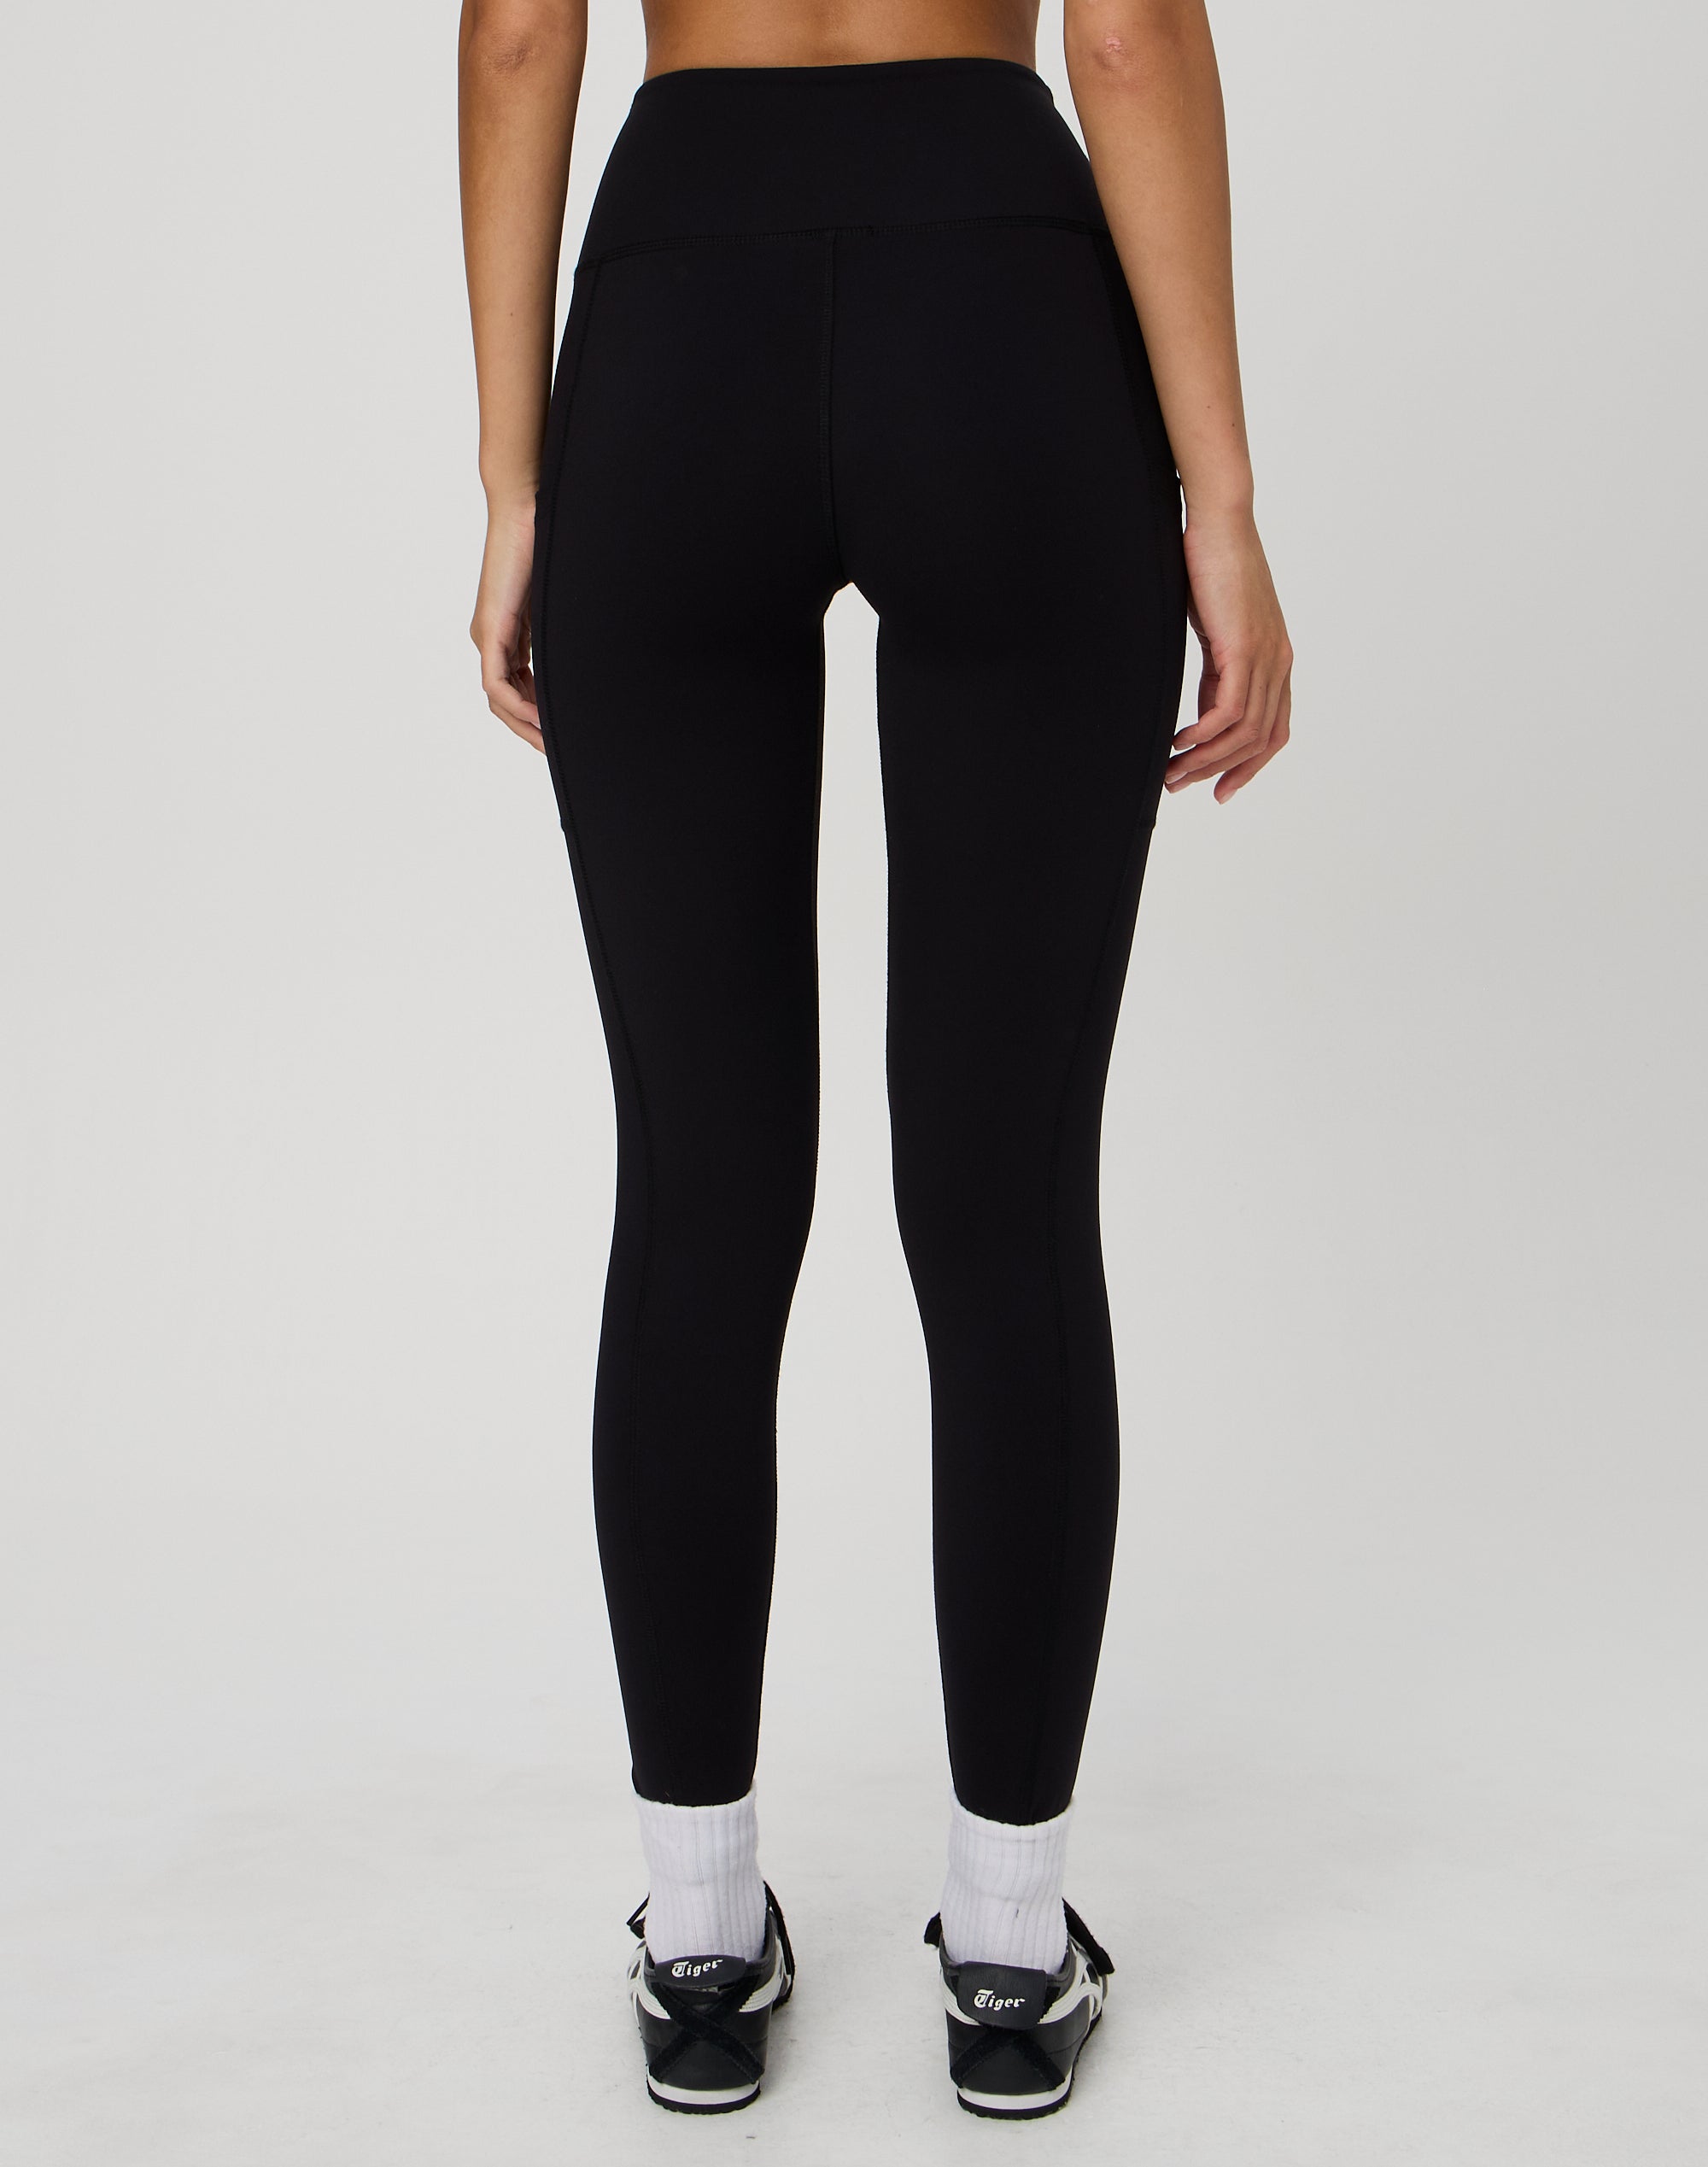 Form Fit Flare Yoga Pant in Black